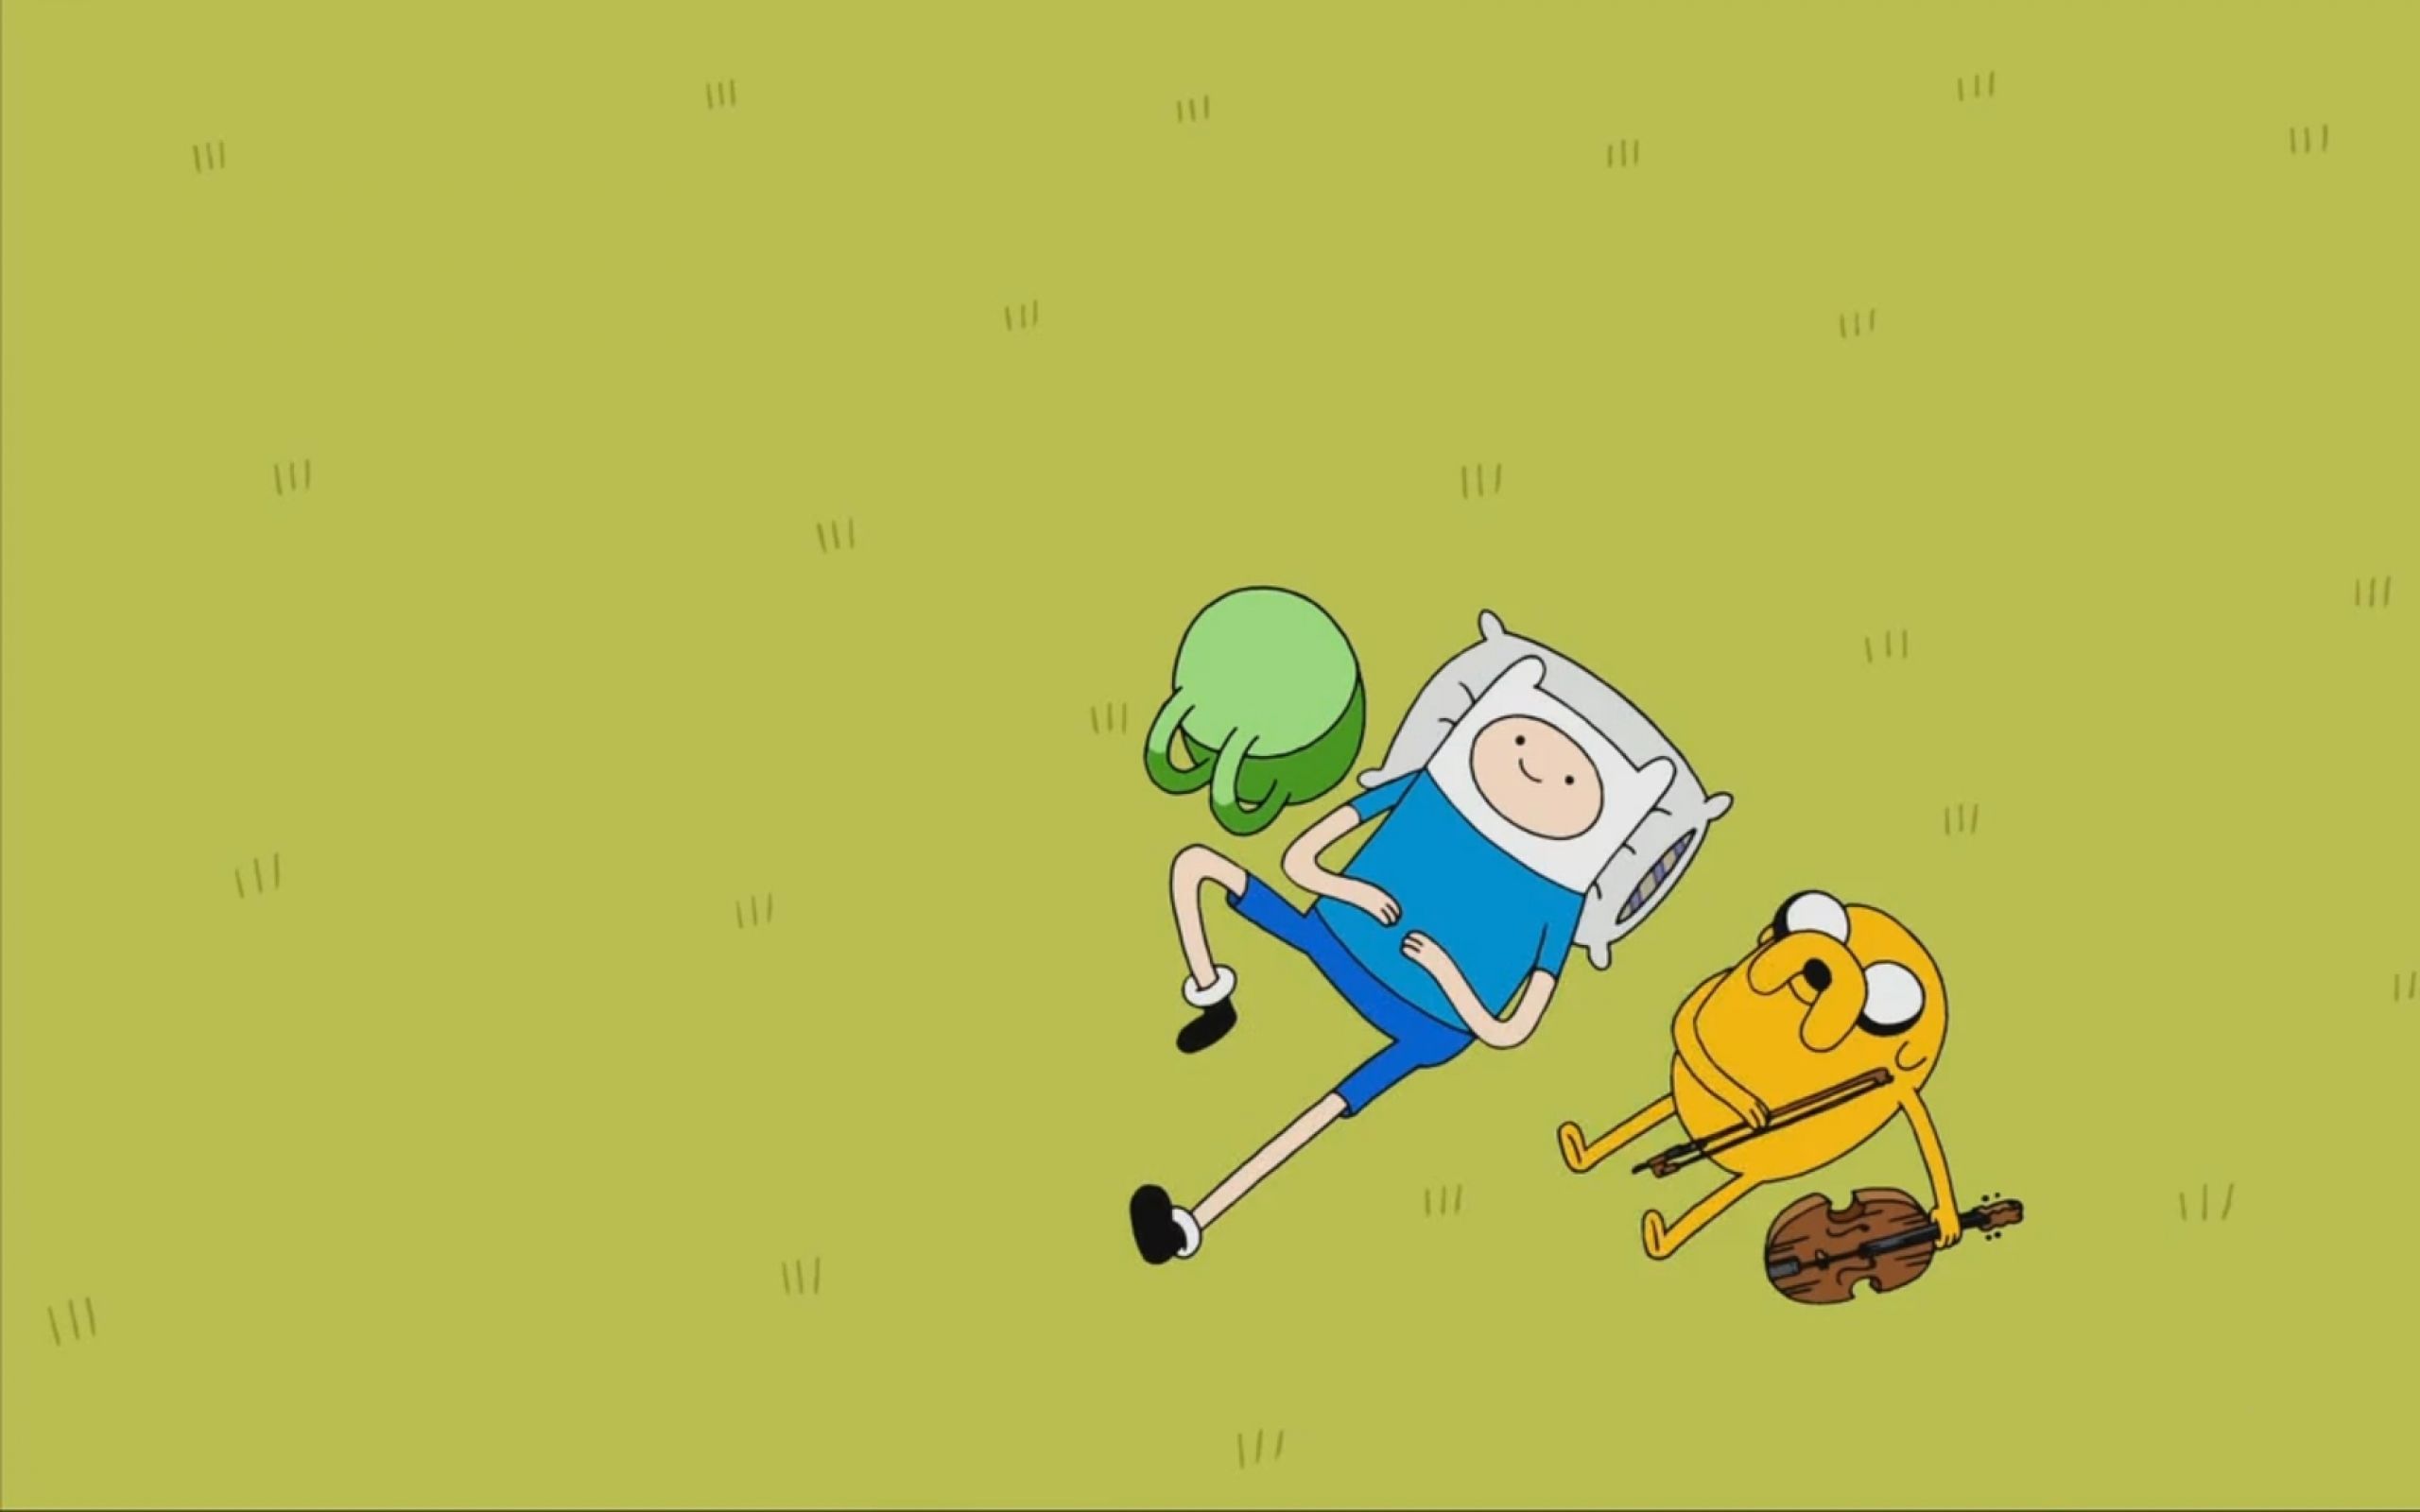 Finn and Jake lying on the grass - Adventure Time